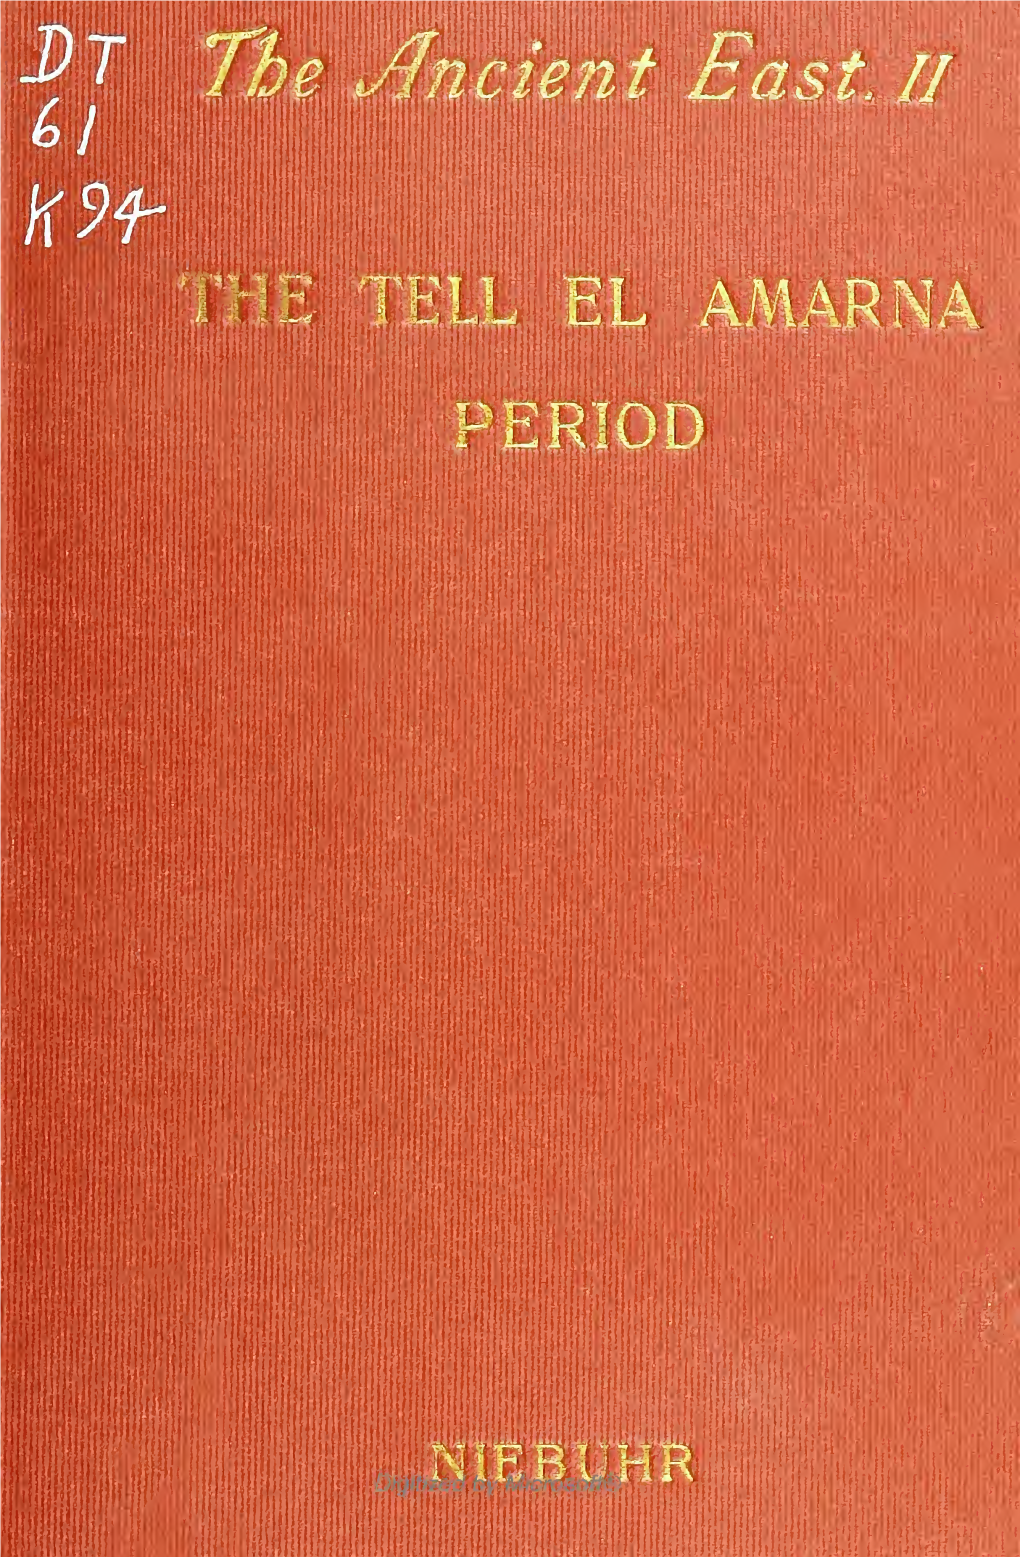 The Tell El Amarna Period. the Relations of Egypt and Western Asia